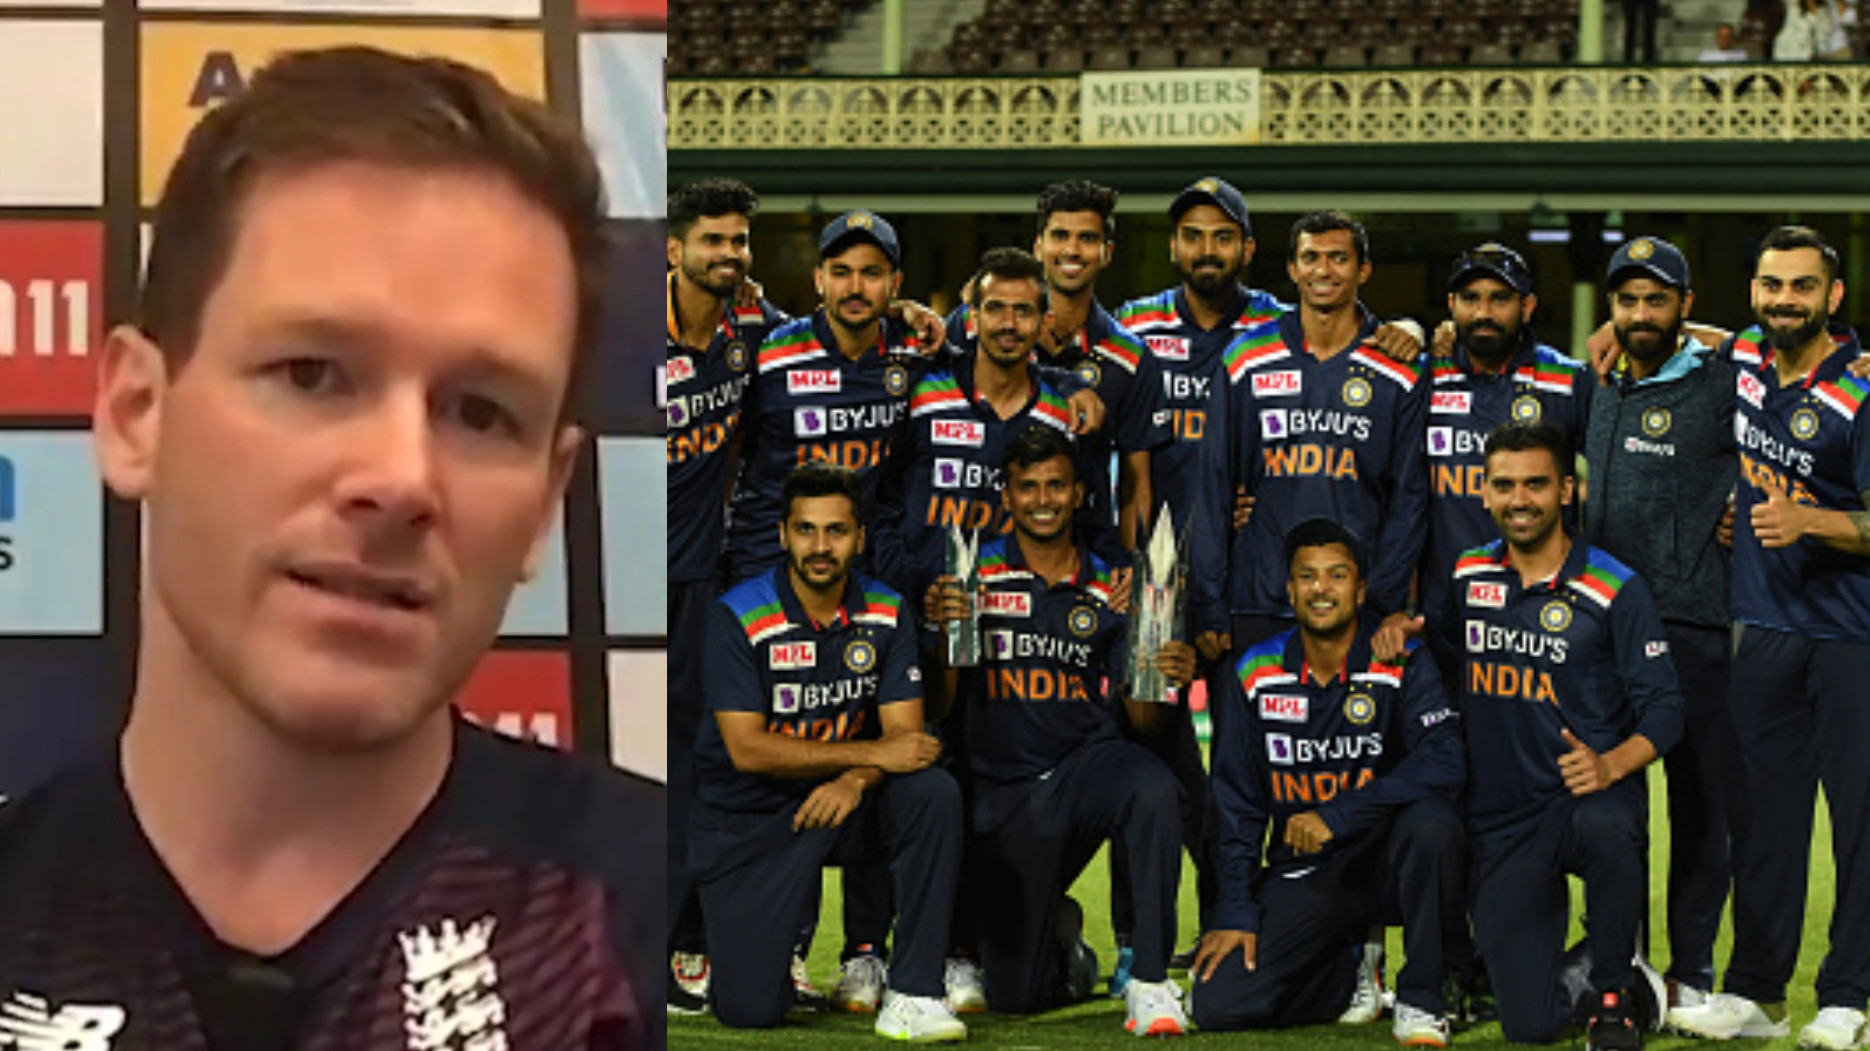 IND v ENG 2021: “India are a difficult team team to beat in their own backyard,” admits Eoin Morgan